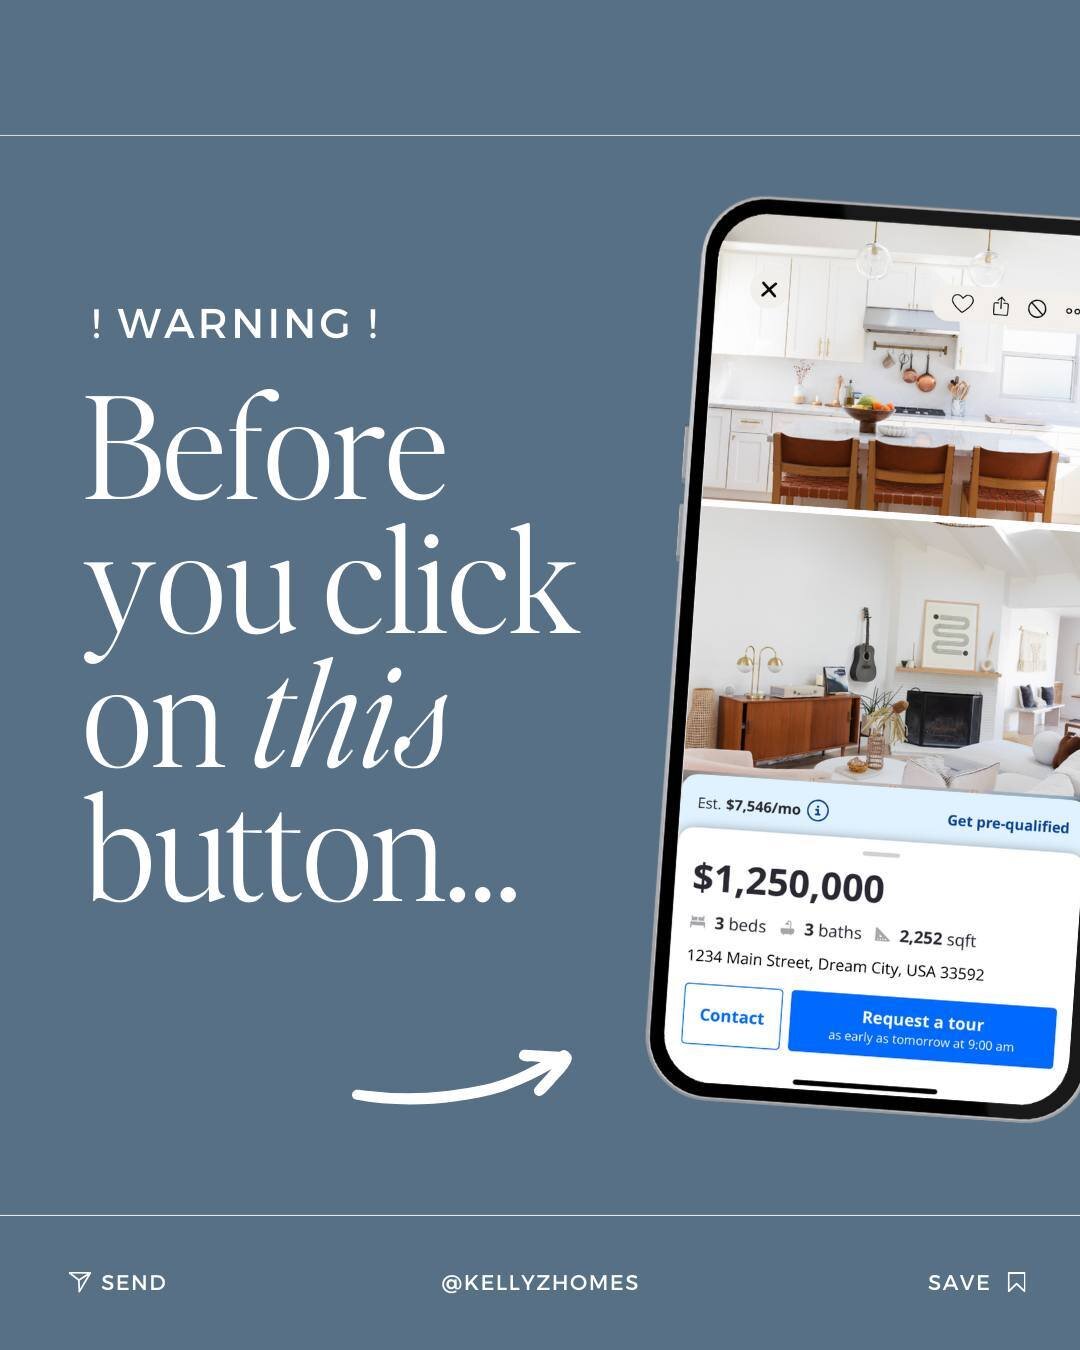 It feels so easy, right?
Spot a beautiful home on Zillow, click the &lsquo;Request a tour&rsquo; button, and voila, you're one step closer to your dream house.
BUT here's the catch: that one click propels your personal info into a world of real estat